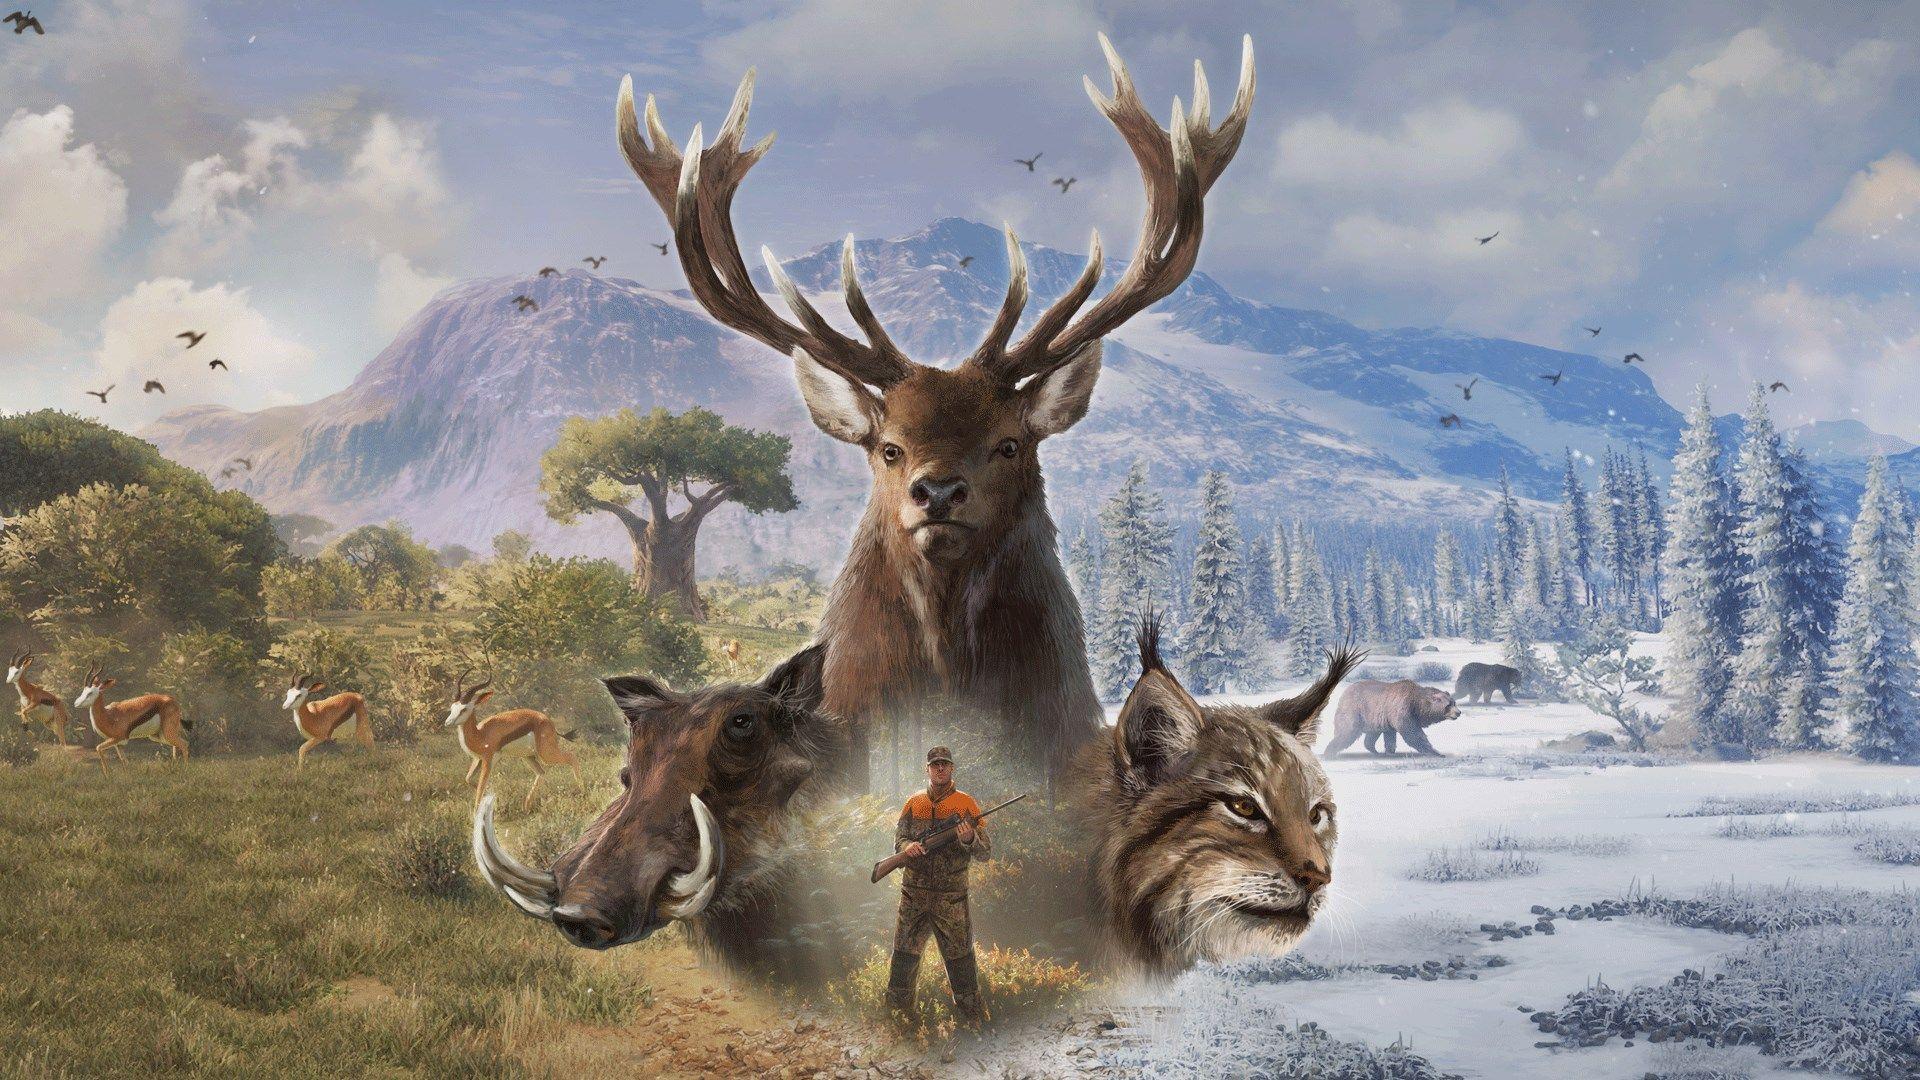 the hunter call of the wild free download mac